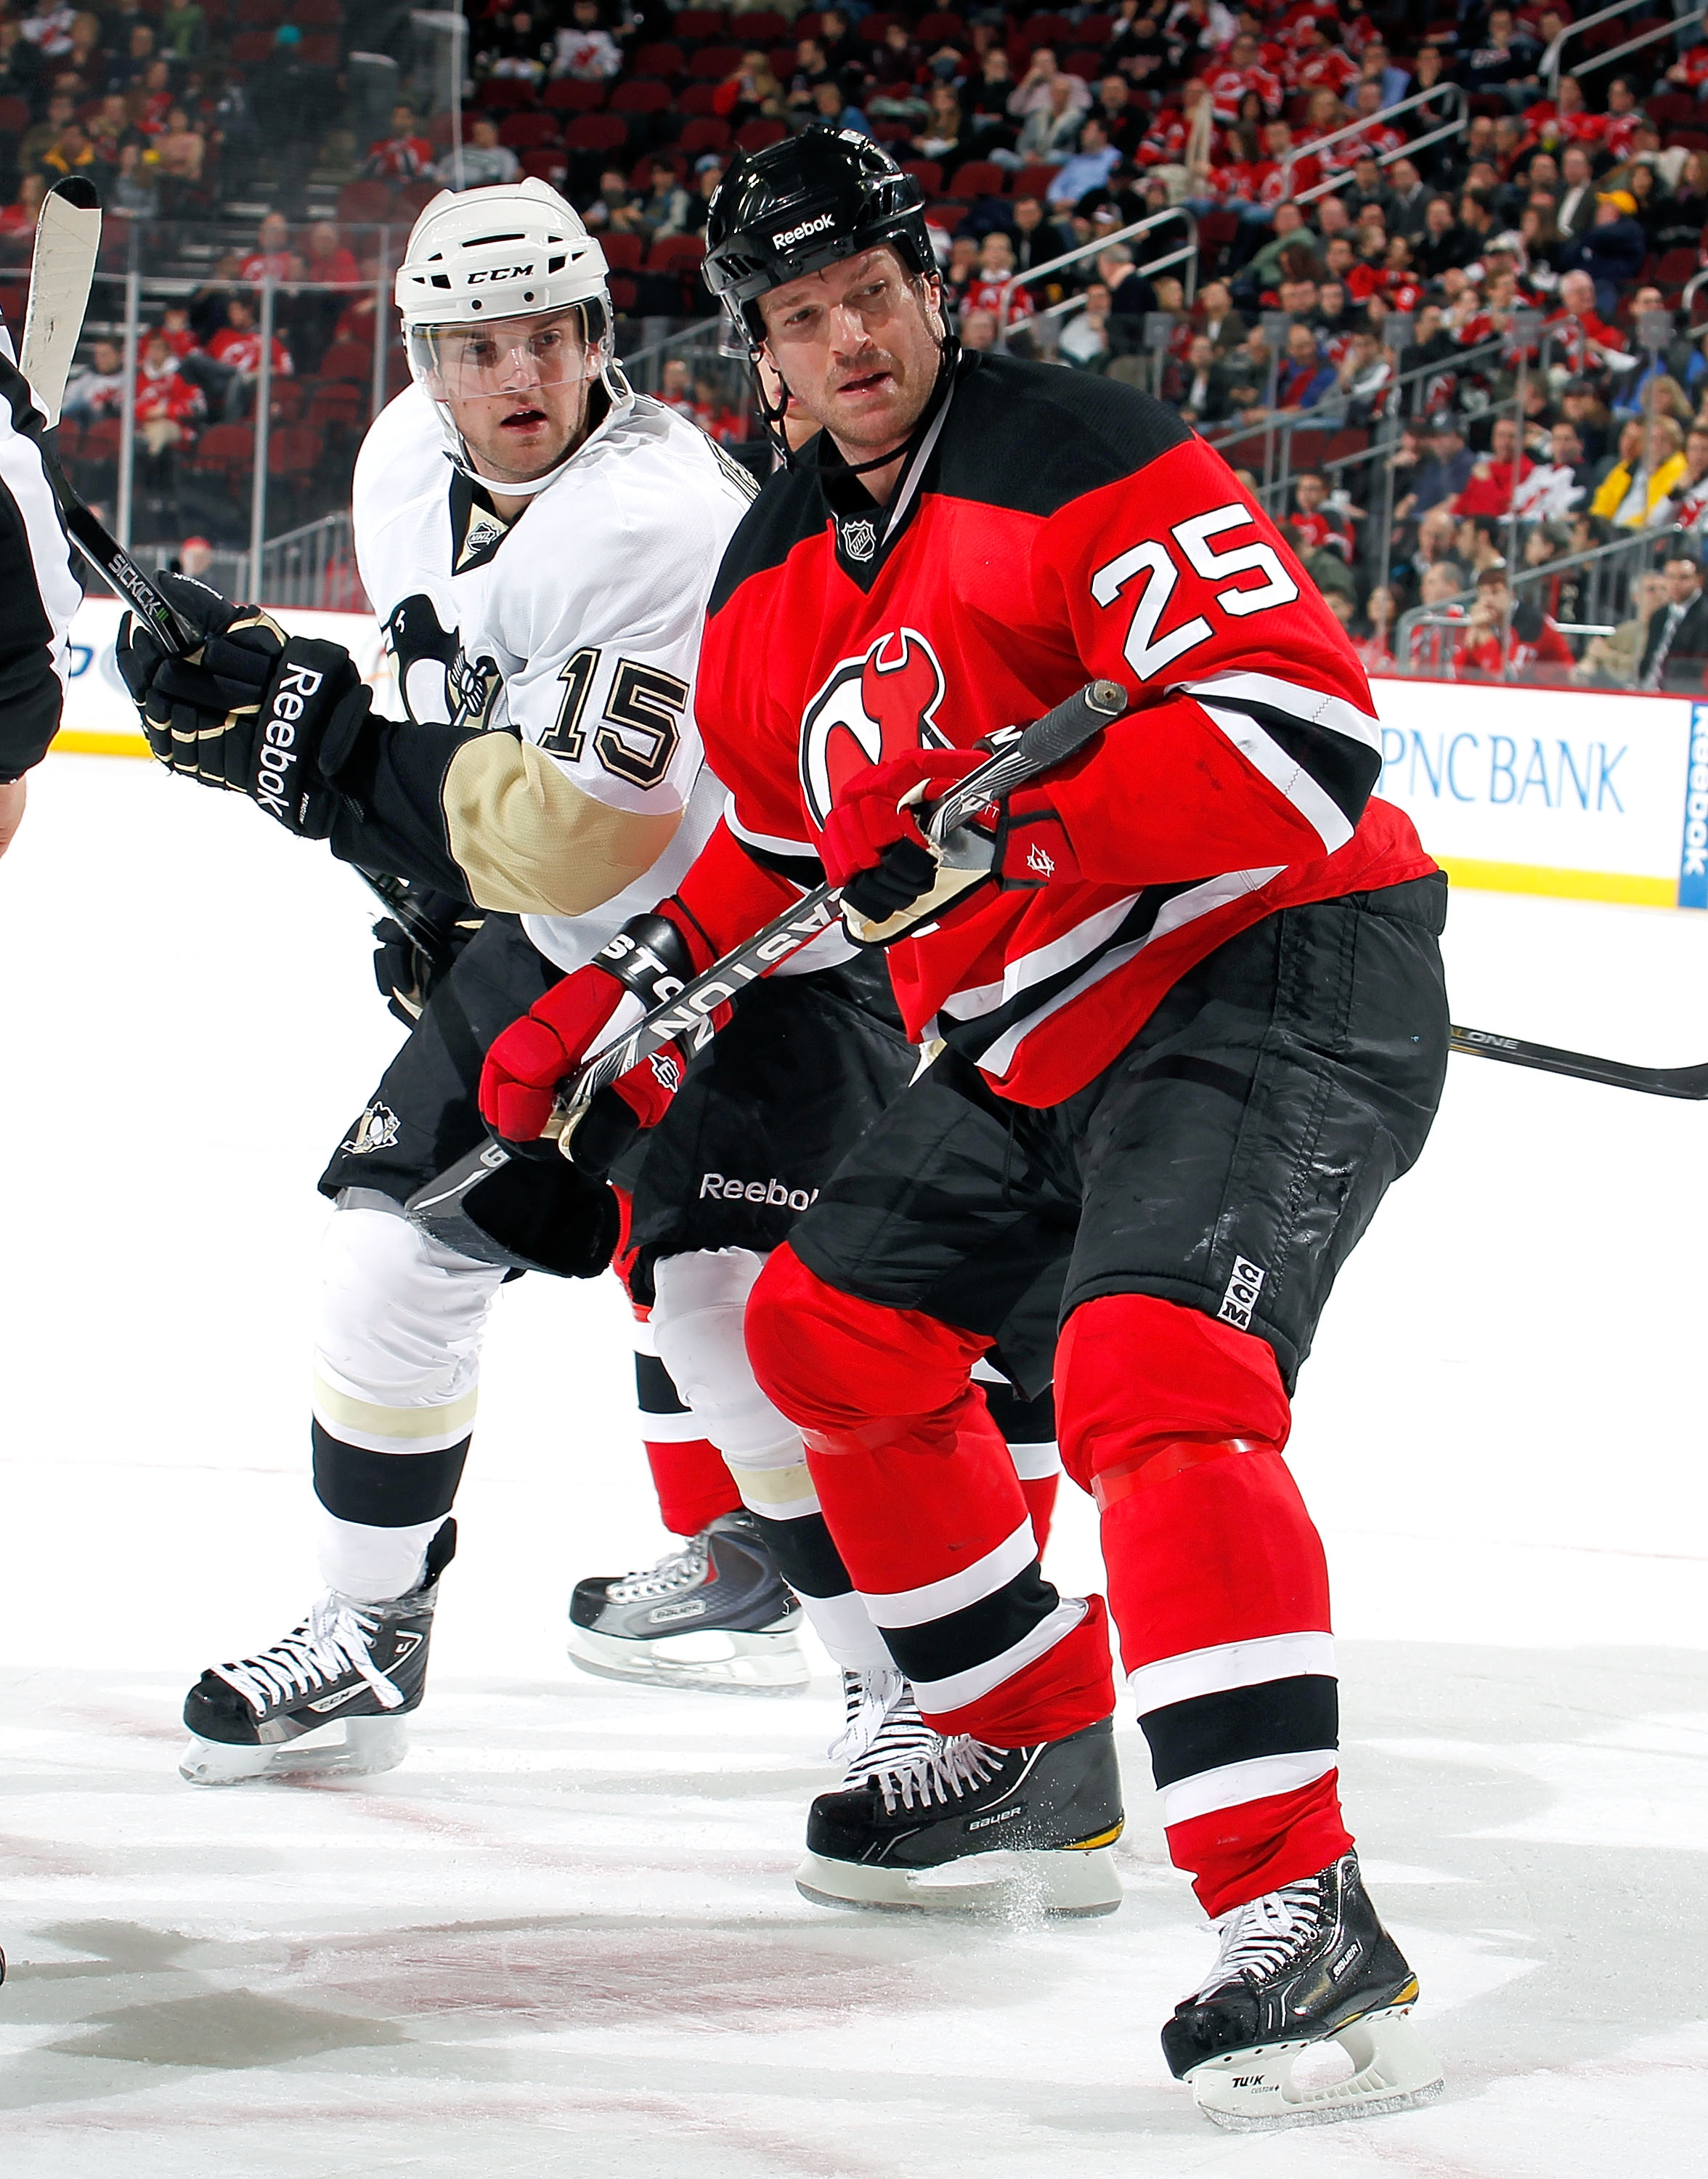 NEWARK, NJ - JANUARY 20:  Dustin Jeffrey #15 of the Pittsburgh Penguins and Jason Arnott #25 of the New Jersey Devils turn toward puck in an NHL hockey game at the Prudential Center on January 20, 2011 in Newark, New Jersey.  (Photo by Paul Bereswill/Gett